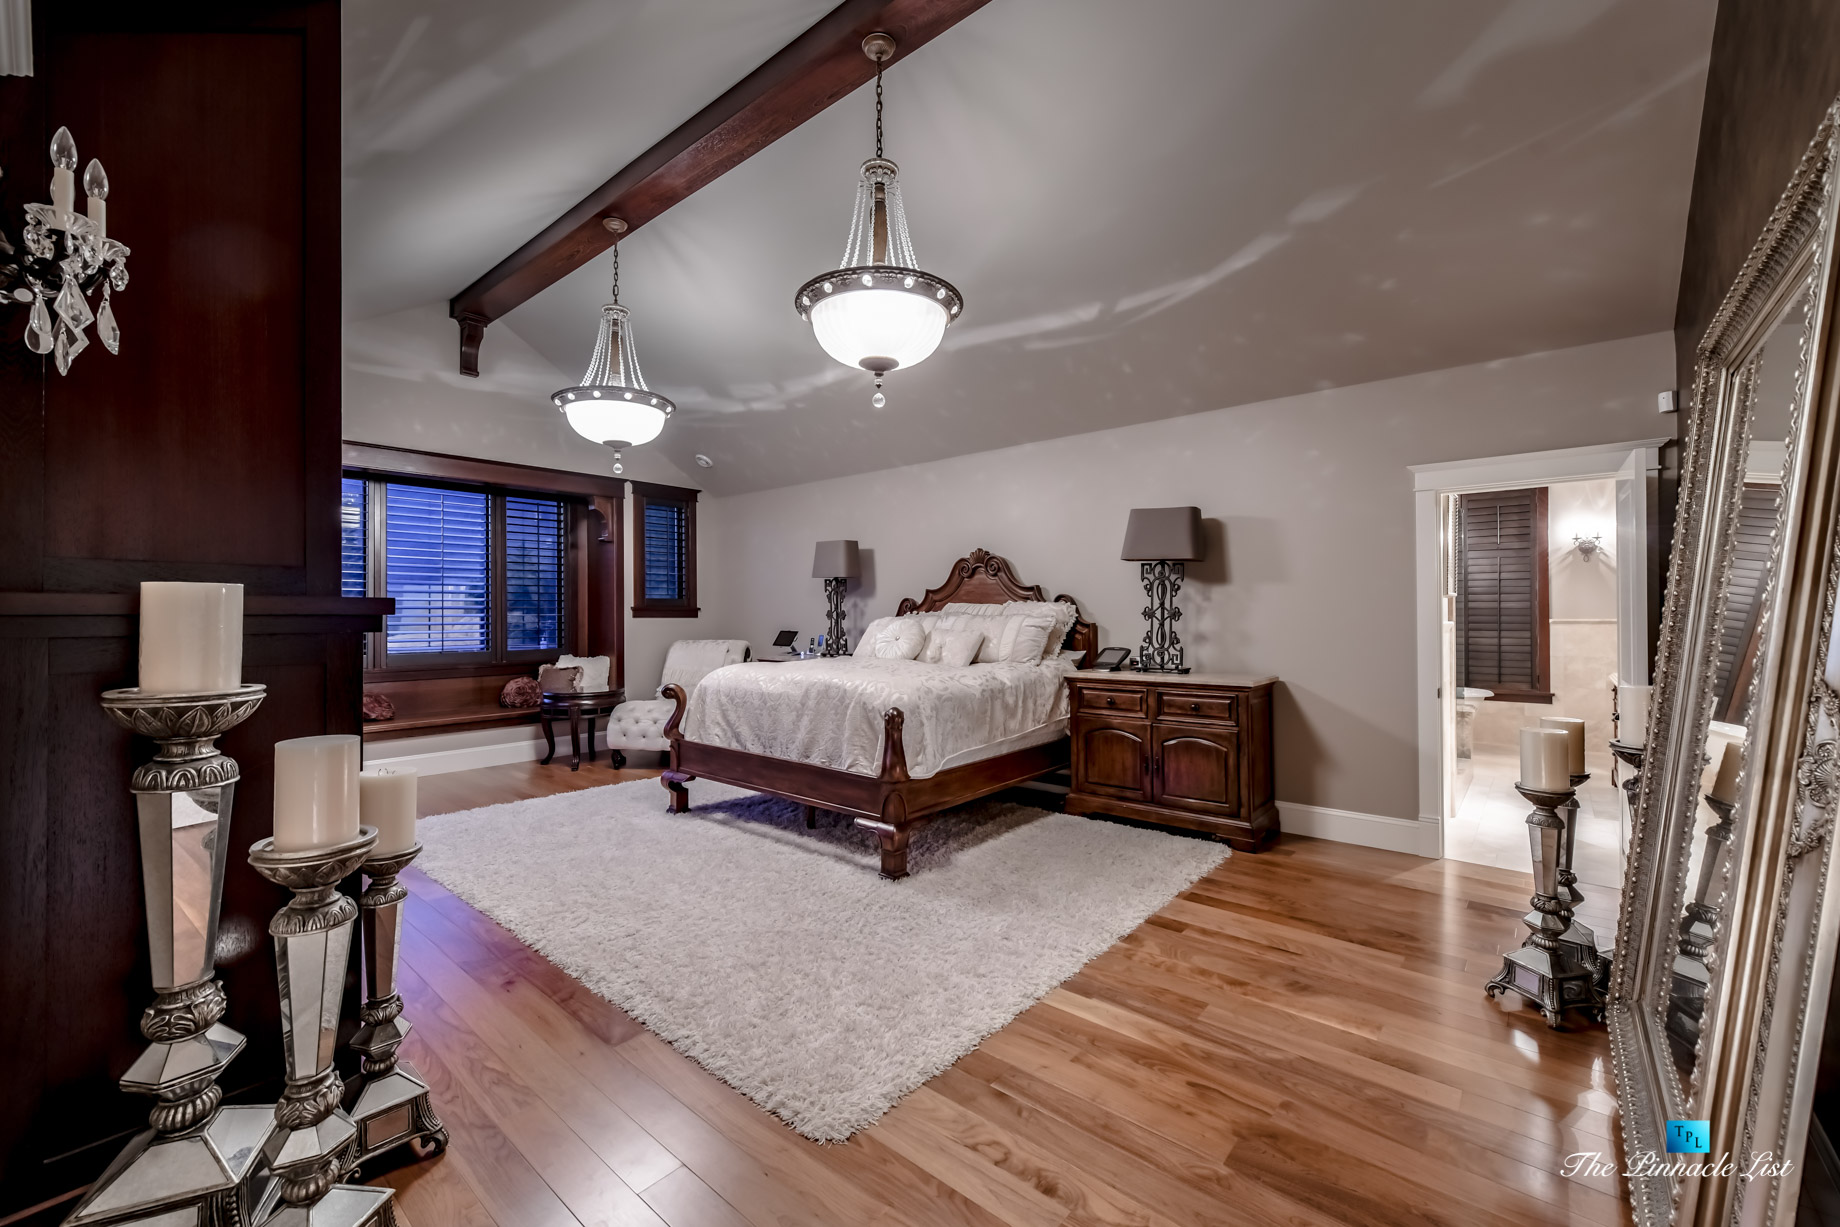 3053 Anmore Creek Way, Anmore, BC, Canada - Master Bedroom - Luxury Real Estate - Greater Vancouver Home